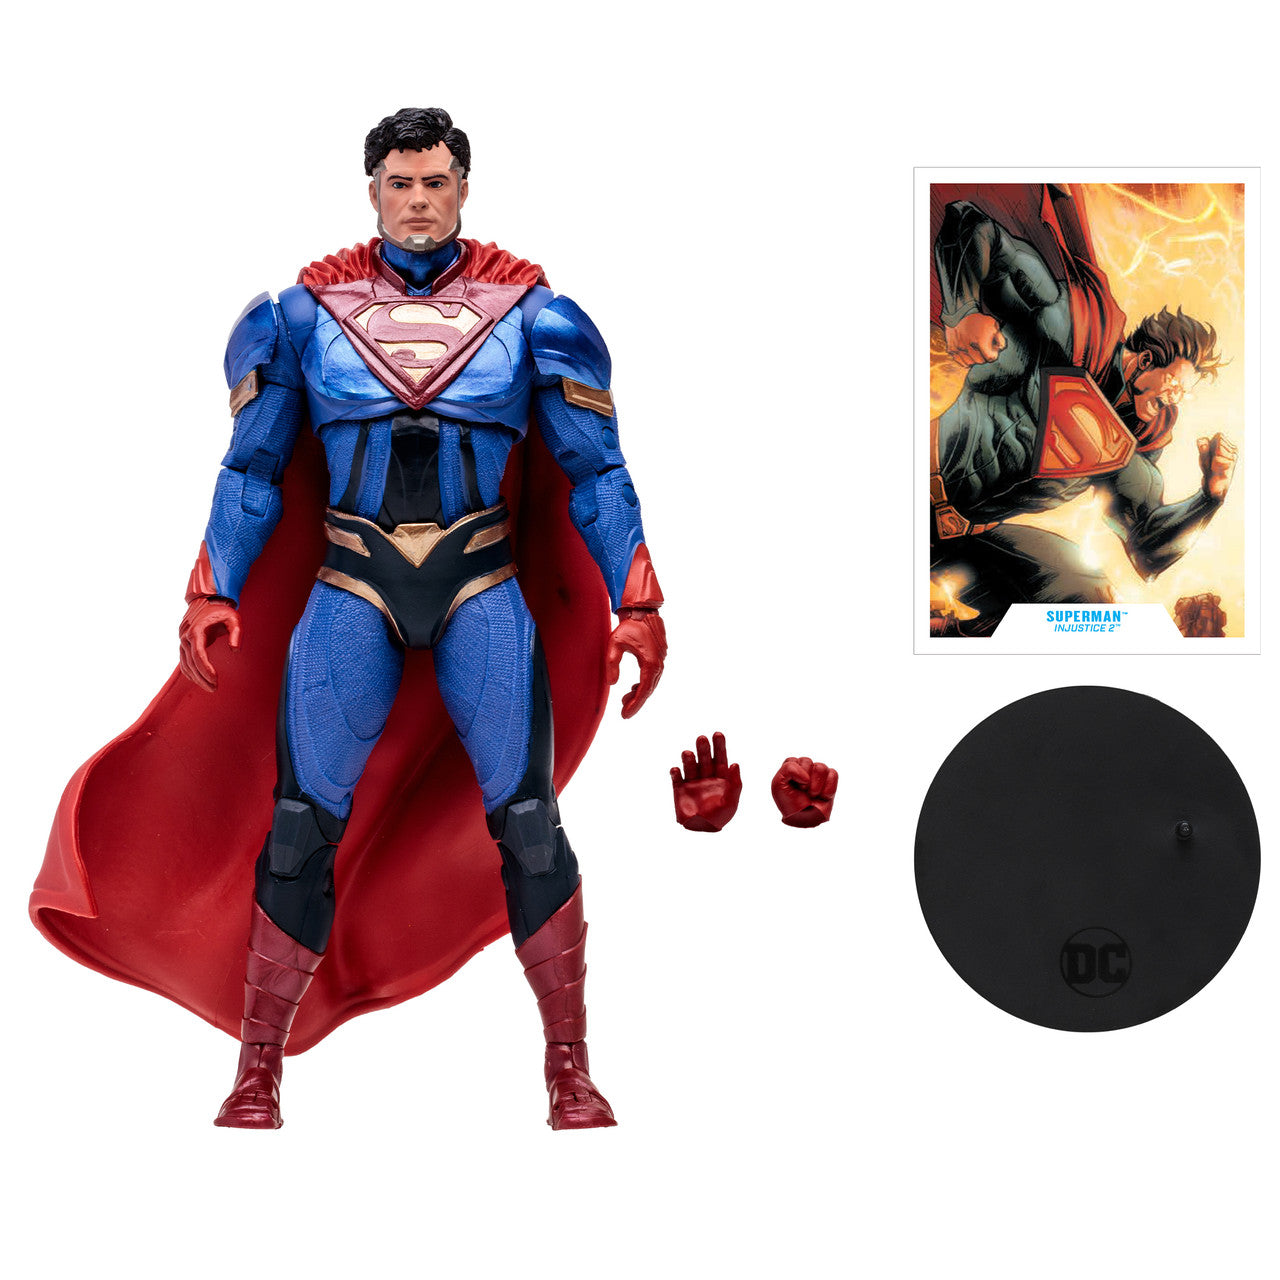 DC Gaming Injustice 2 - Wave 10 - Superman Action Figure Toy with accessories - Heretoserveyou